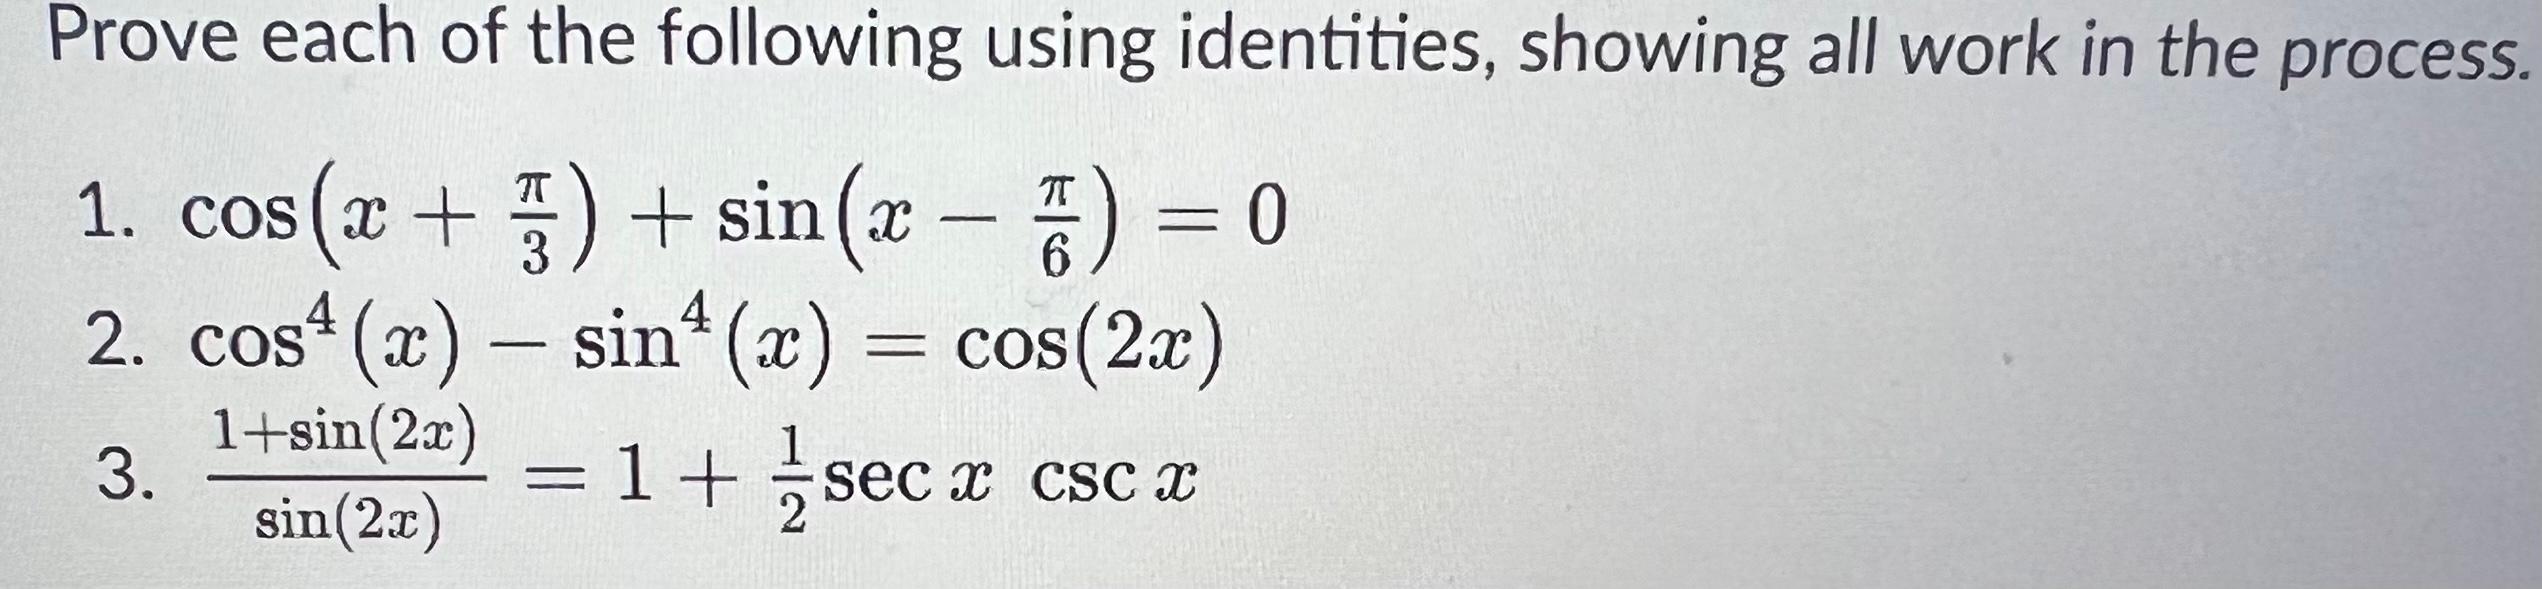 Solved Prove each of the following using identities, showing | Chegg.com